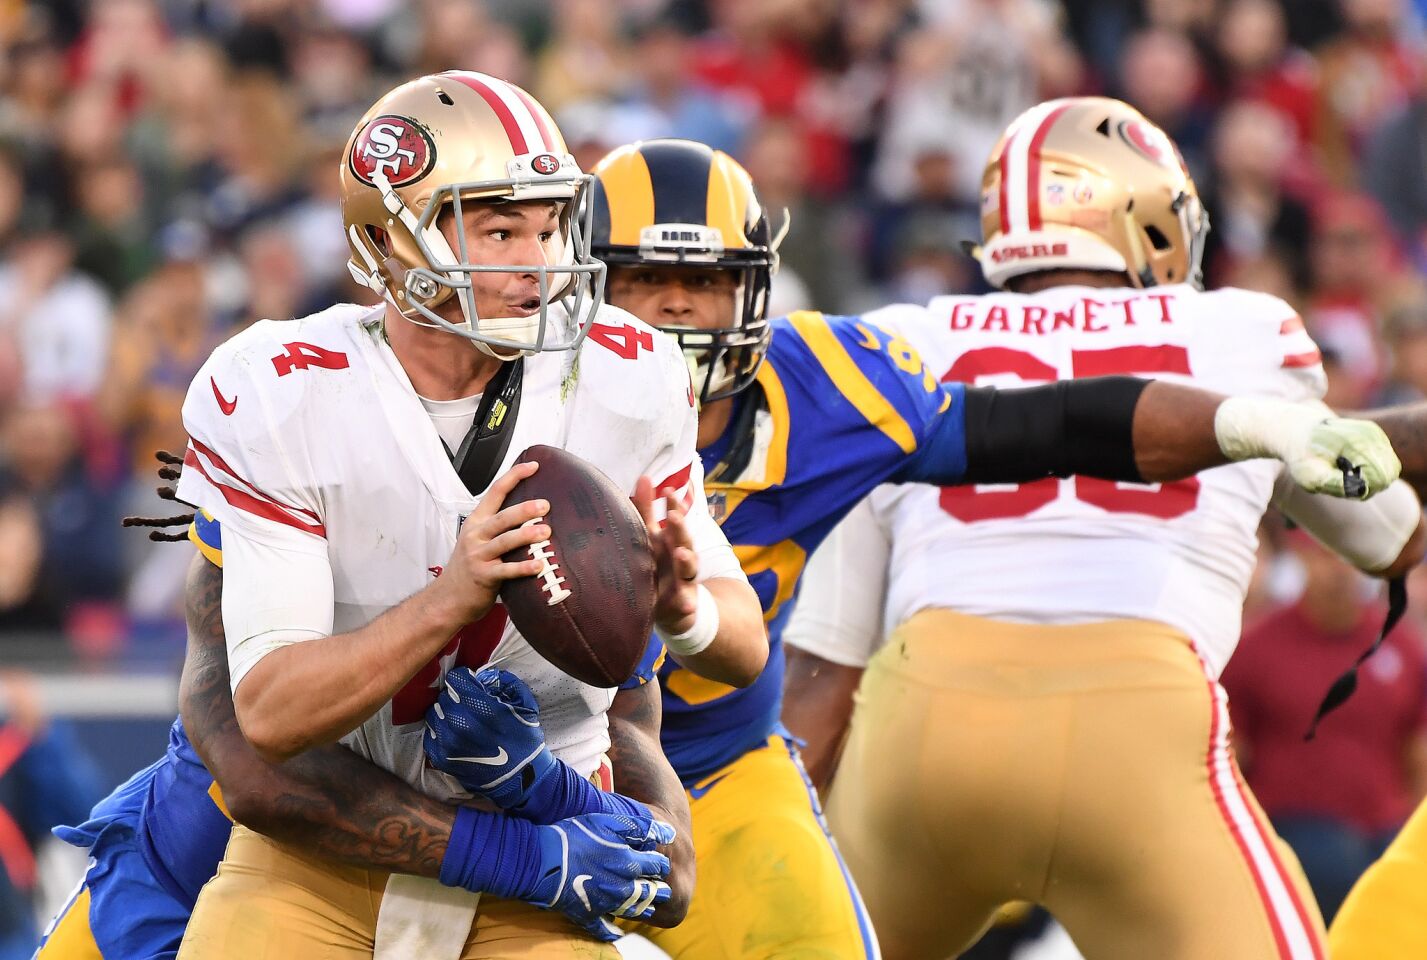 49ers quarterback Nick Mullens is sacked by Rams linebacker Mark Barron.